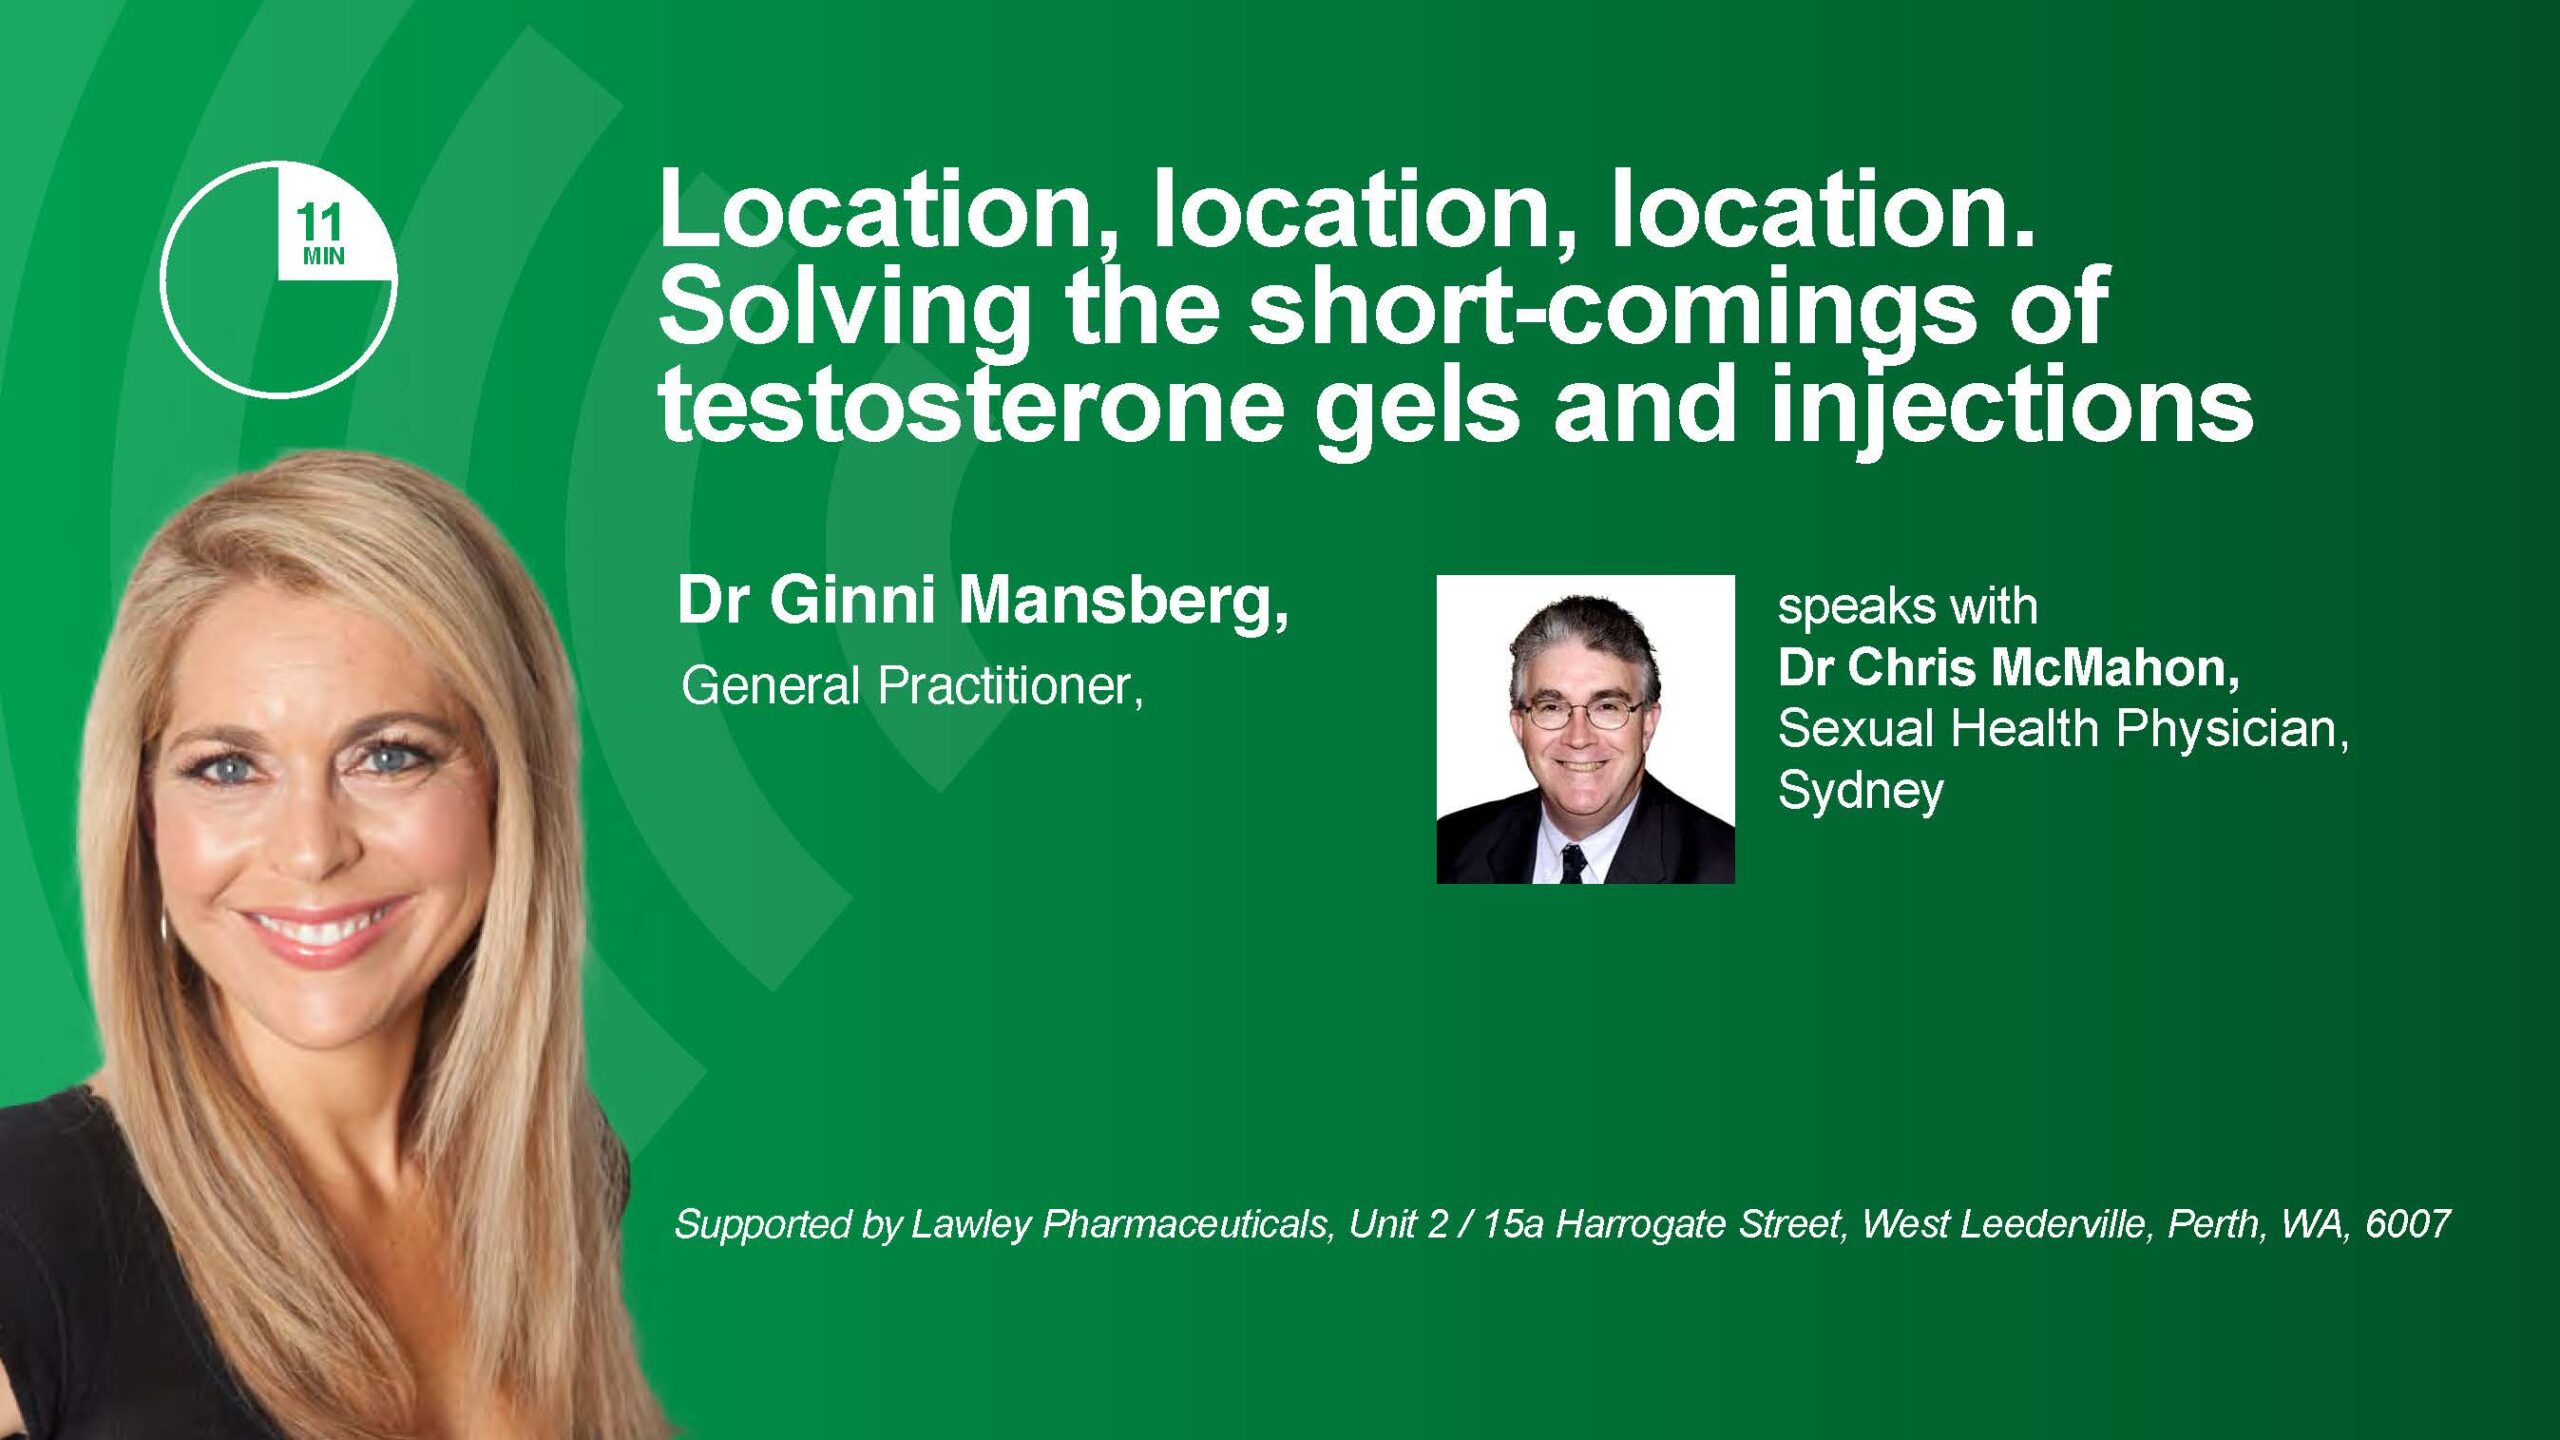 DriveTime – Location, location, location. Solving the short-comings of testosterone gels and injections